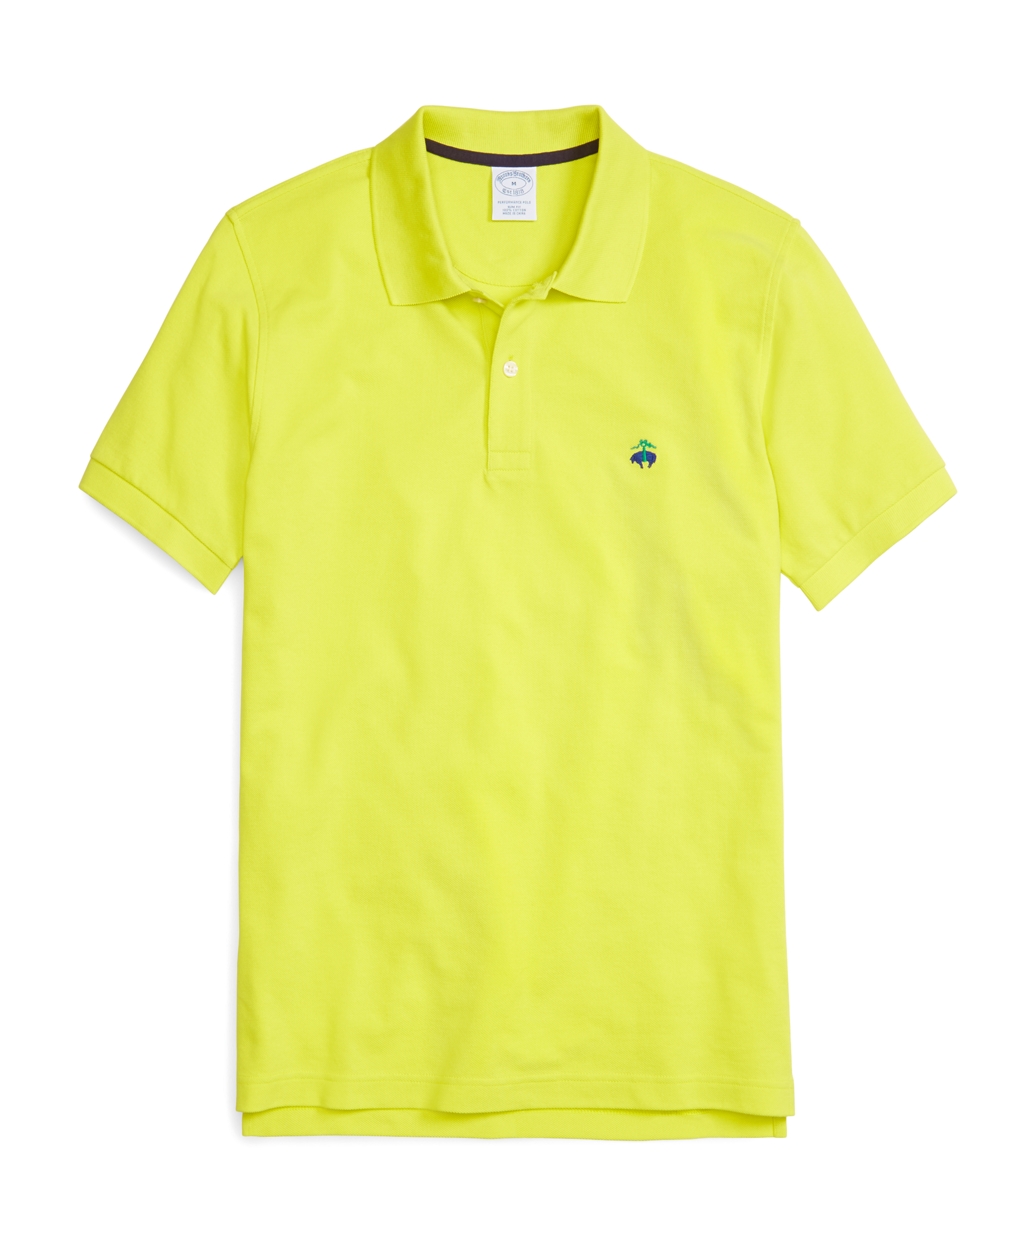 Brooks Brothers Golden Fleece® Slim Fit Performance Polo Shirt in ...